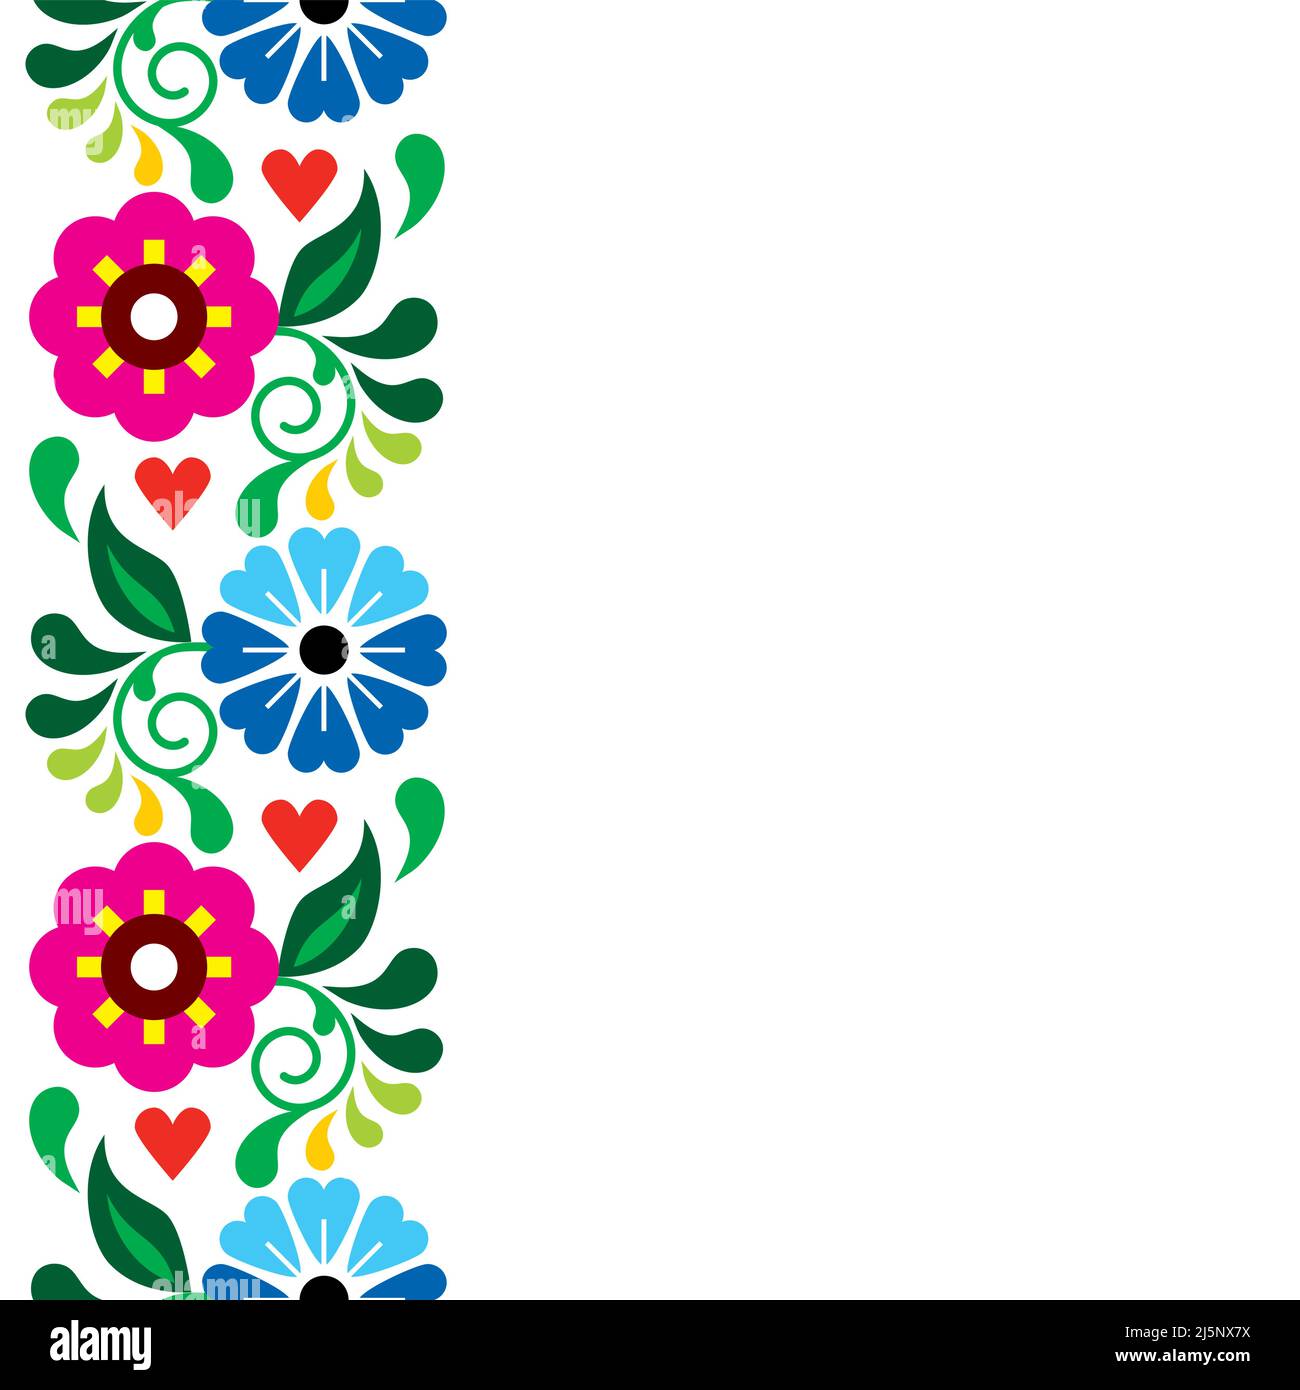 Mexican handmade craft Stock Vector Images - Alamy